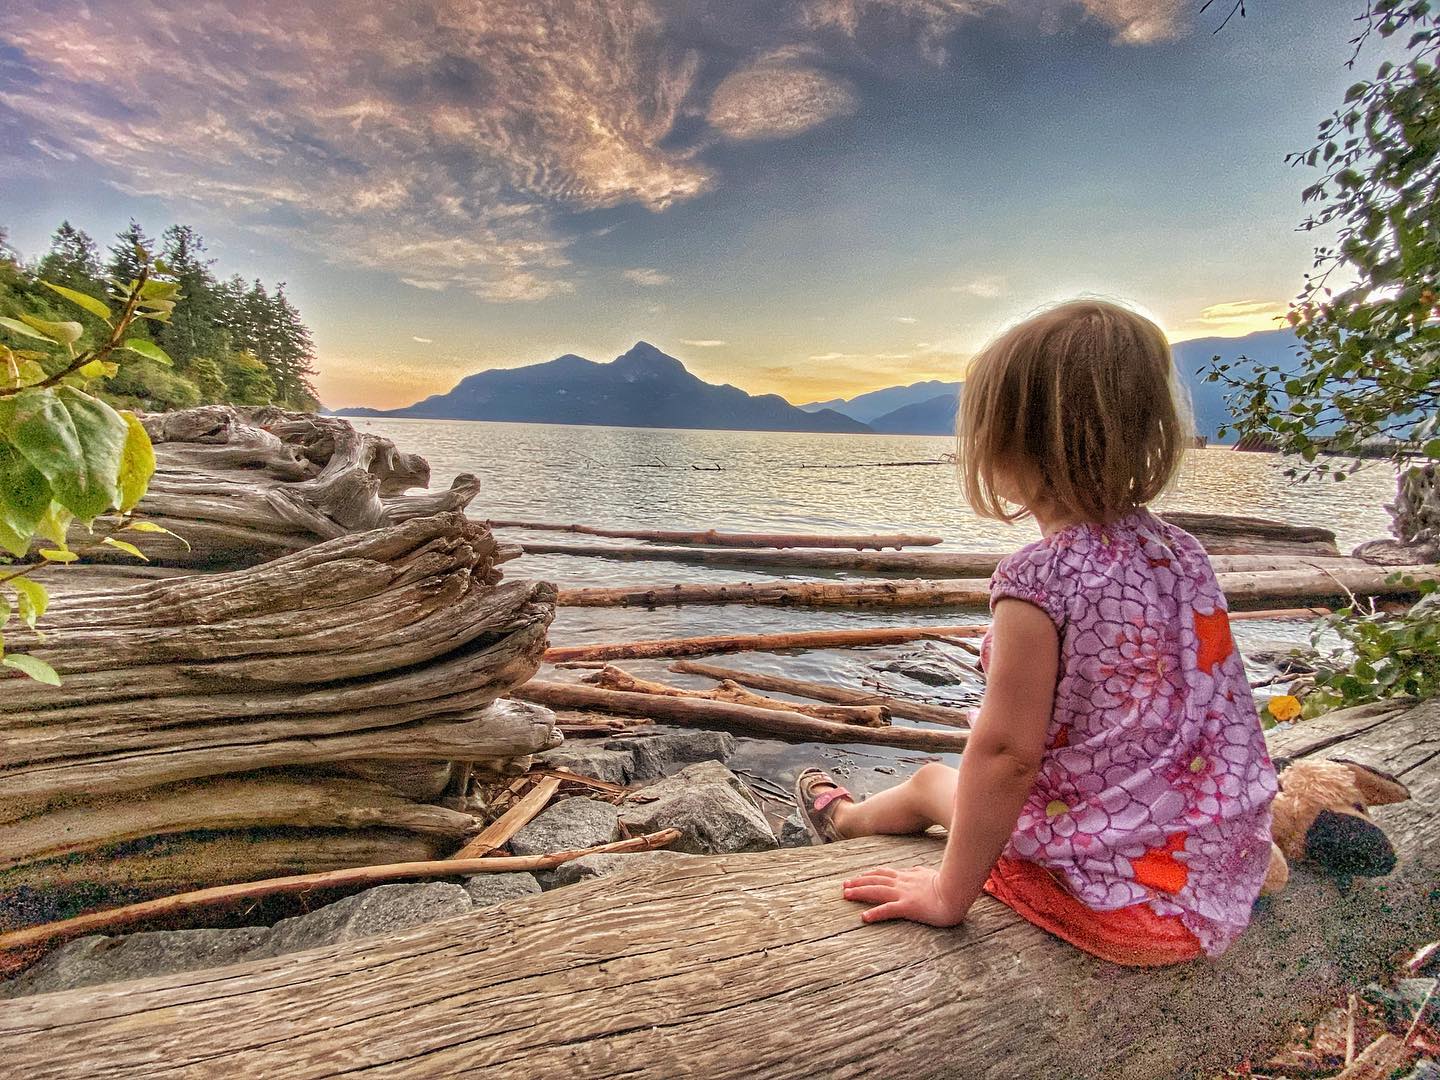 7 Epic Places to Watch The Sunset in Squamish Image